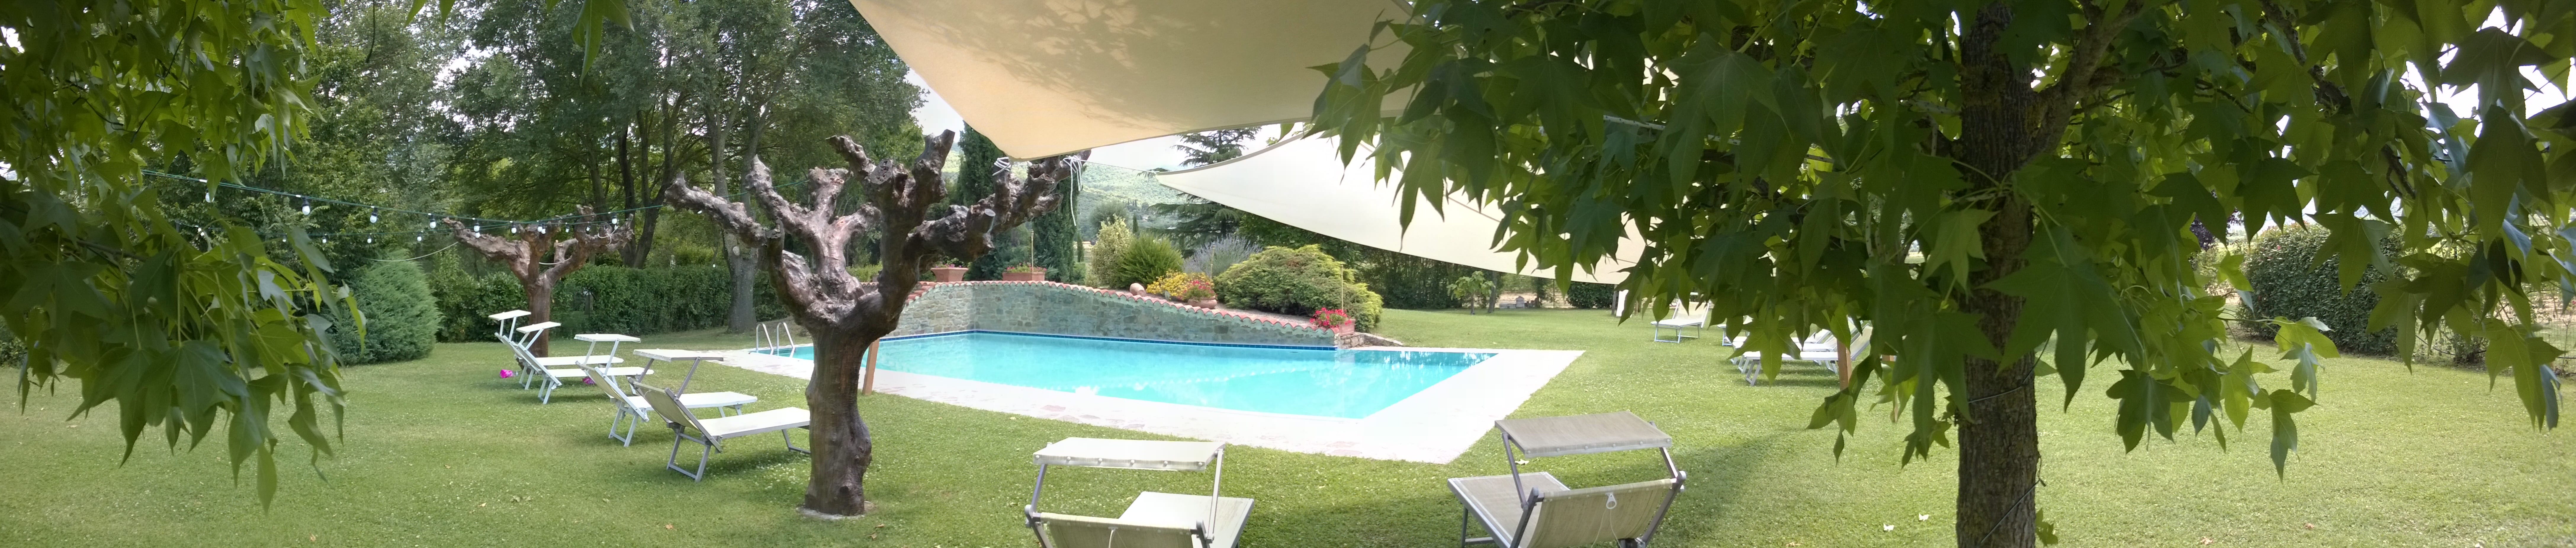 Farmhouse in Cortona with swimming pool and park